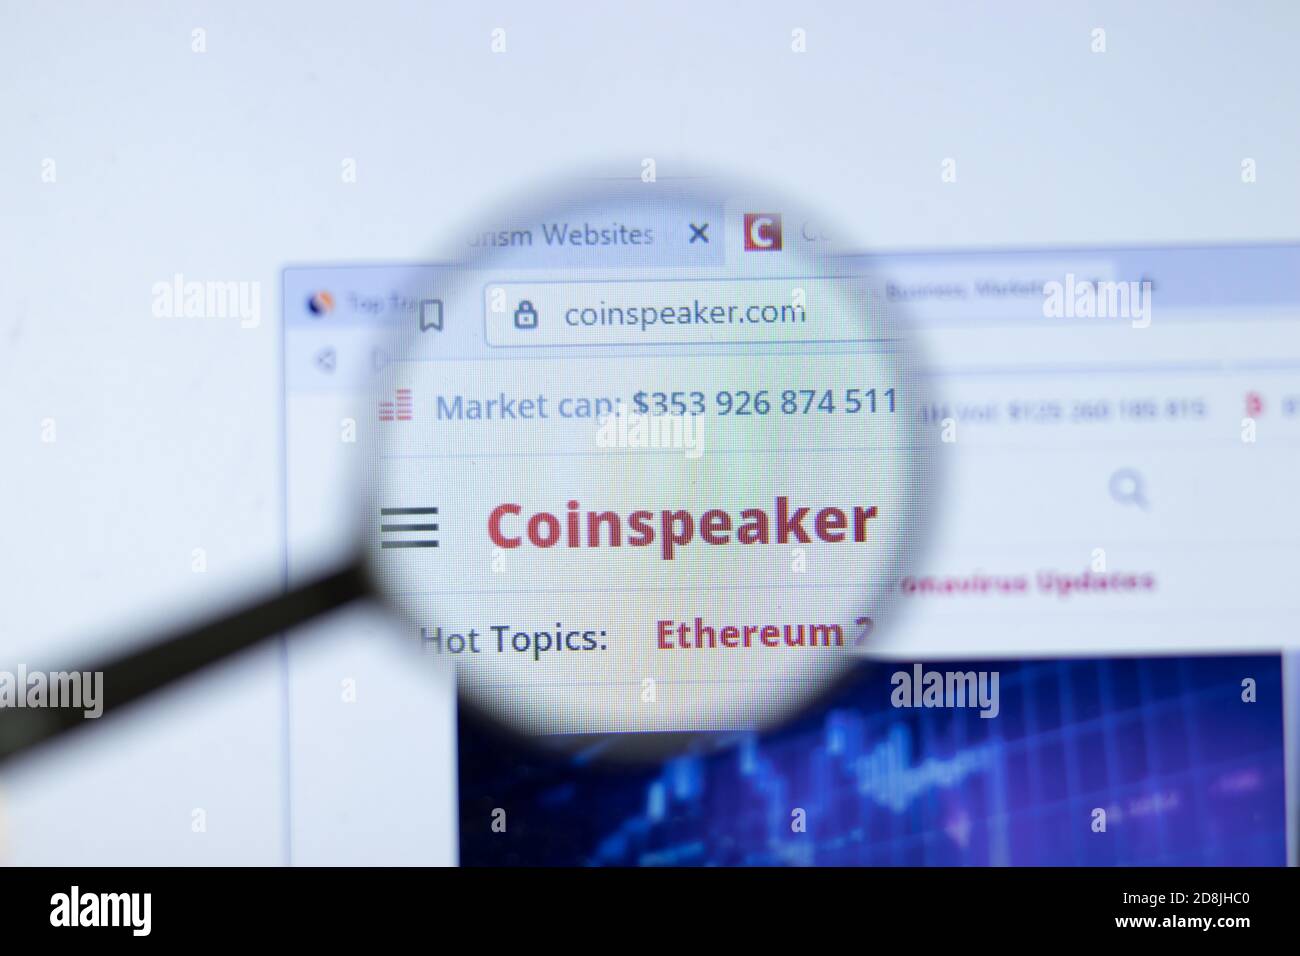 New York, USA - 26 October 2020: Coinspeaker company website with logo close up, Illustrative Editorial Stock Photo